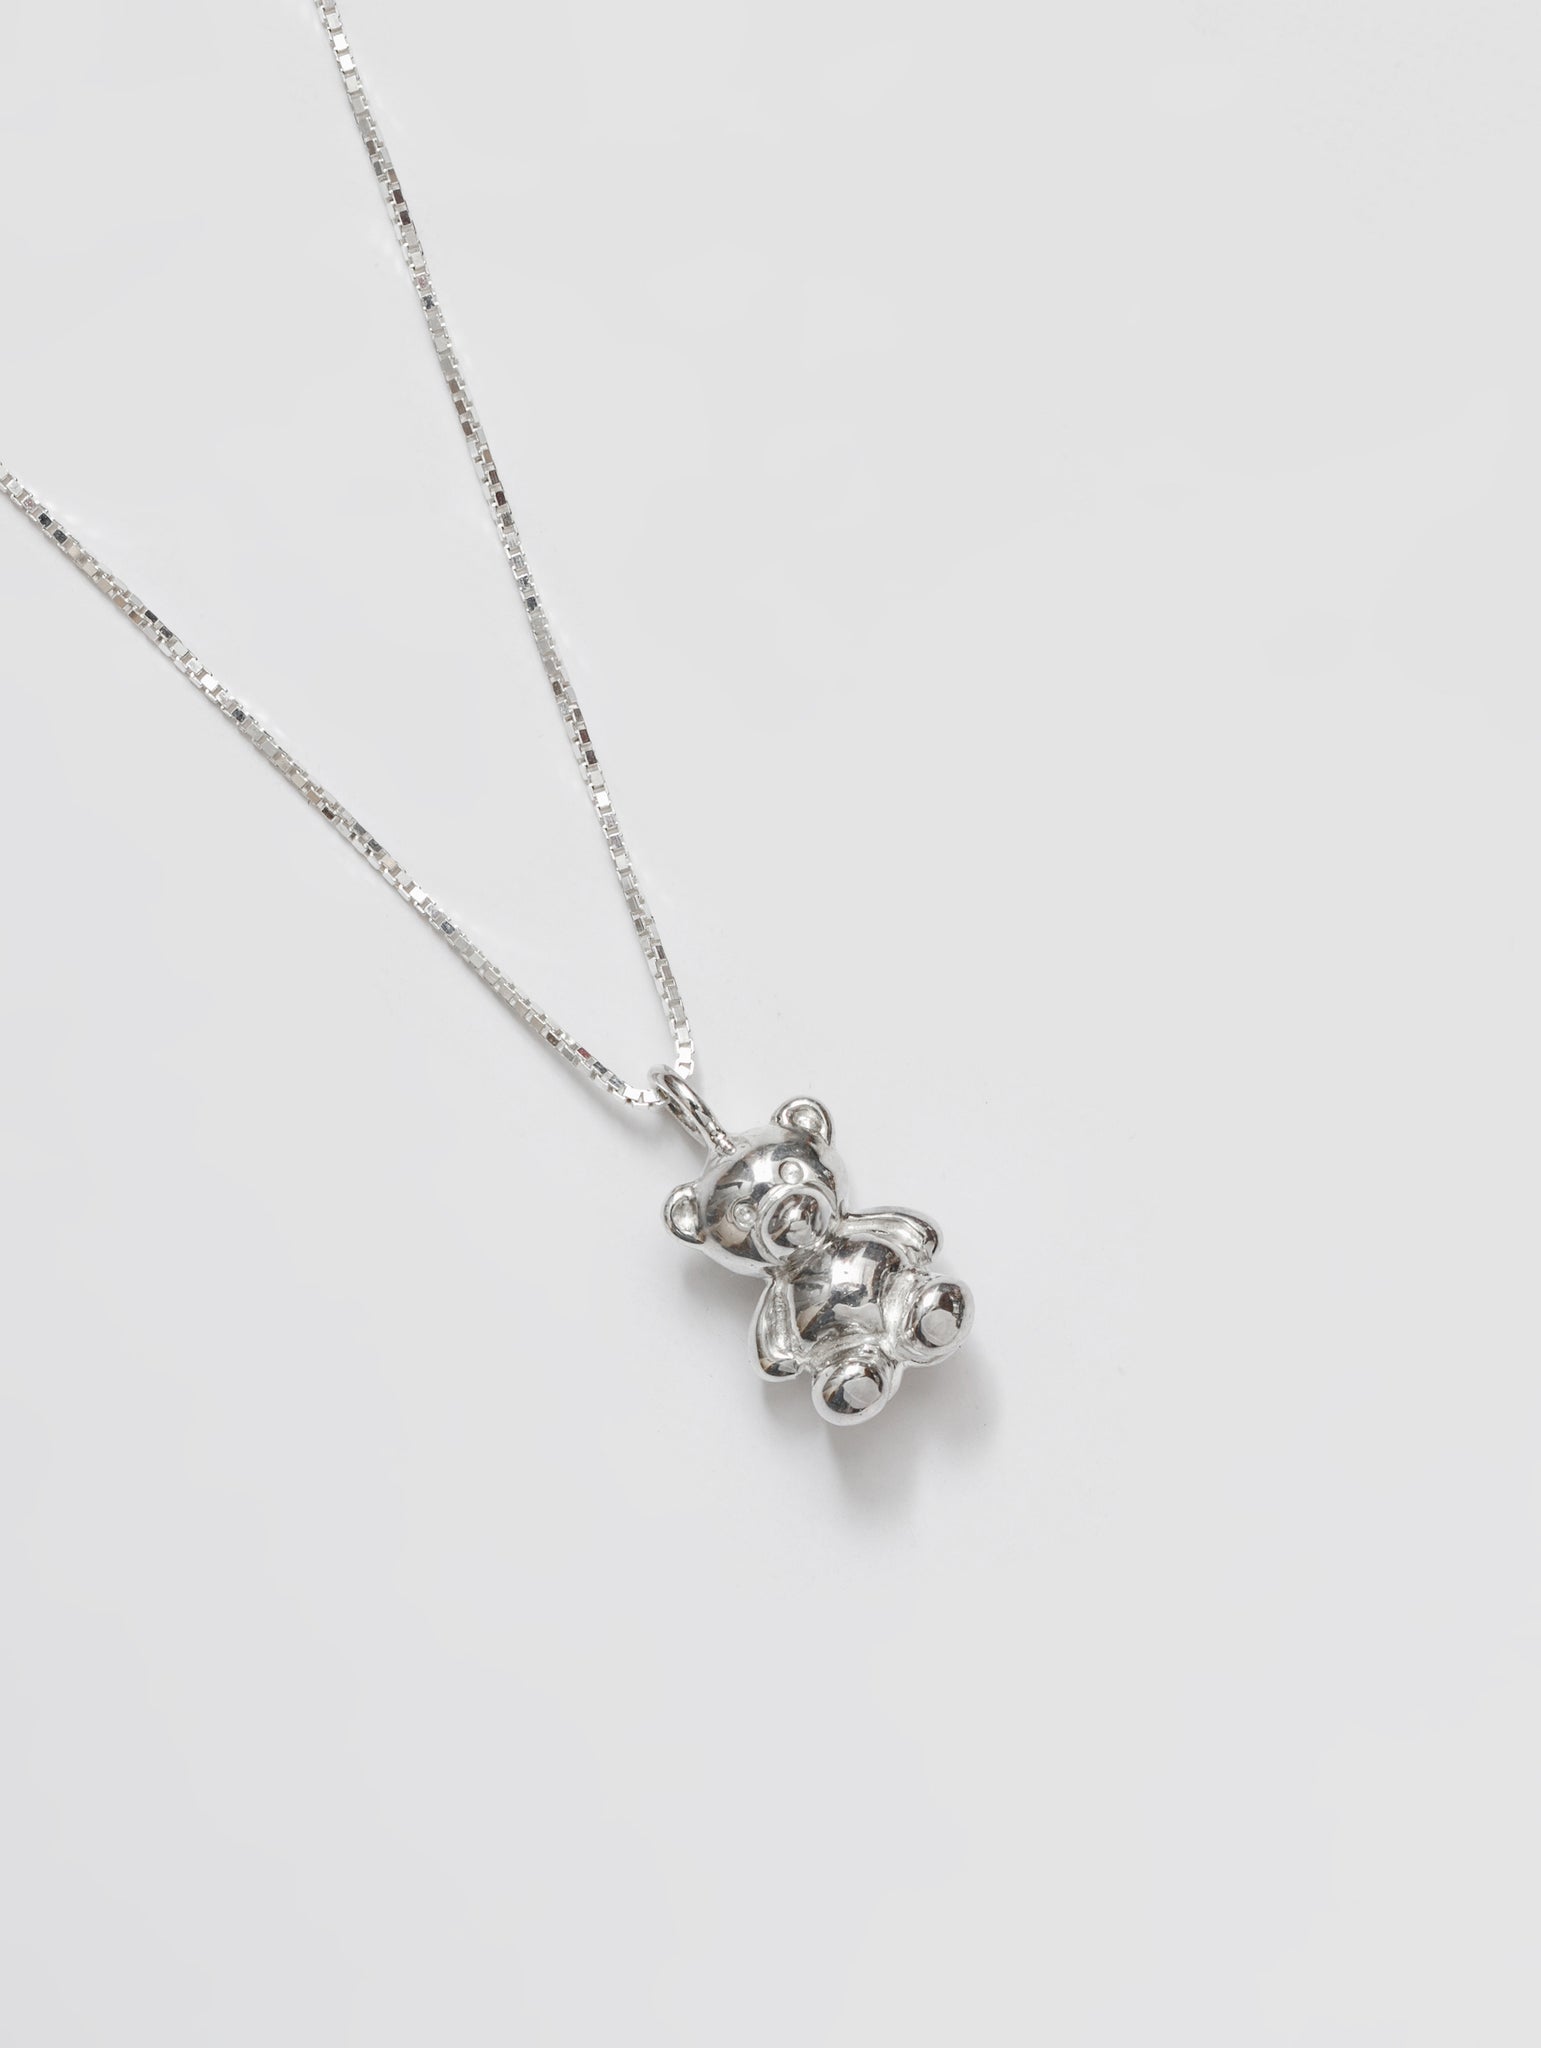 Teddy Charm Necklace in Sterling Silver